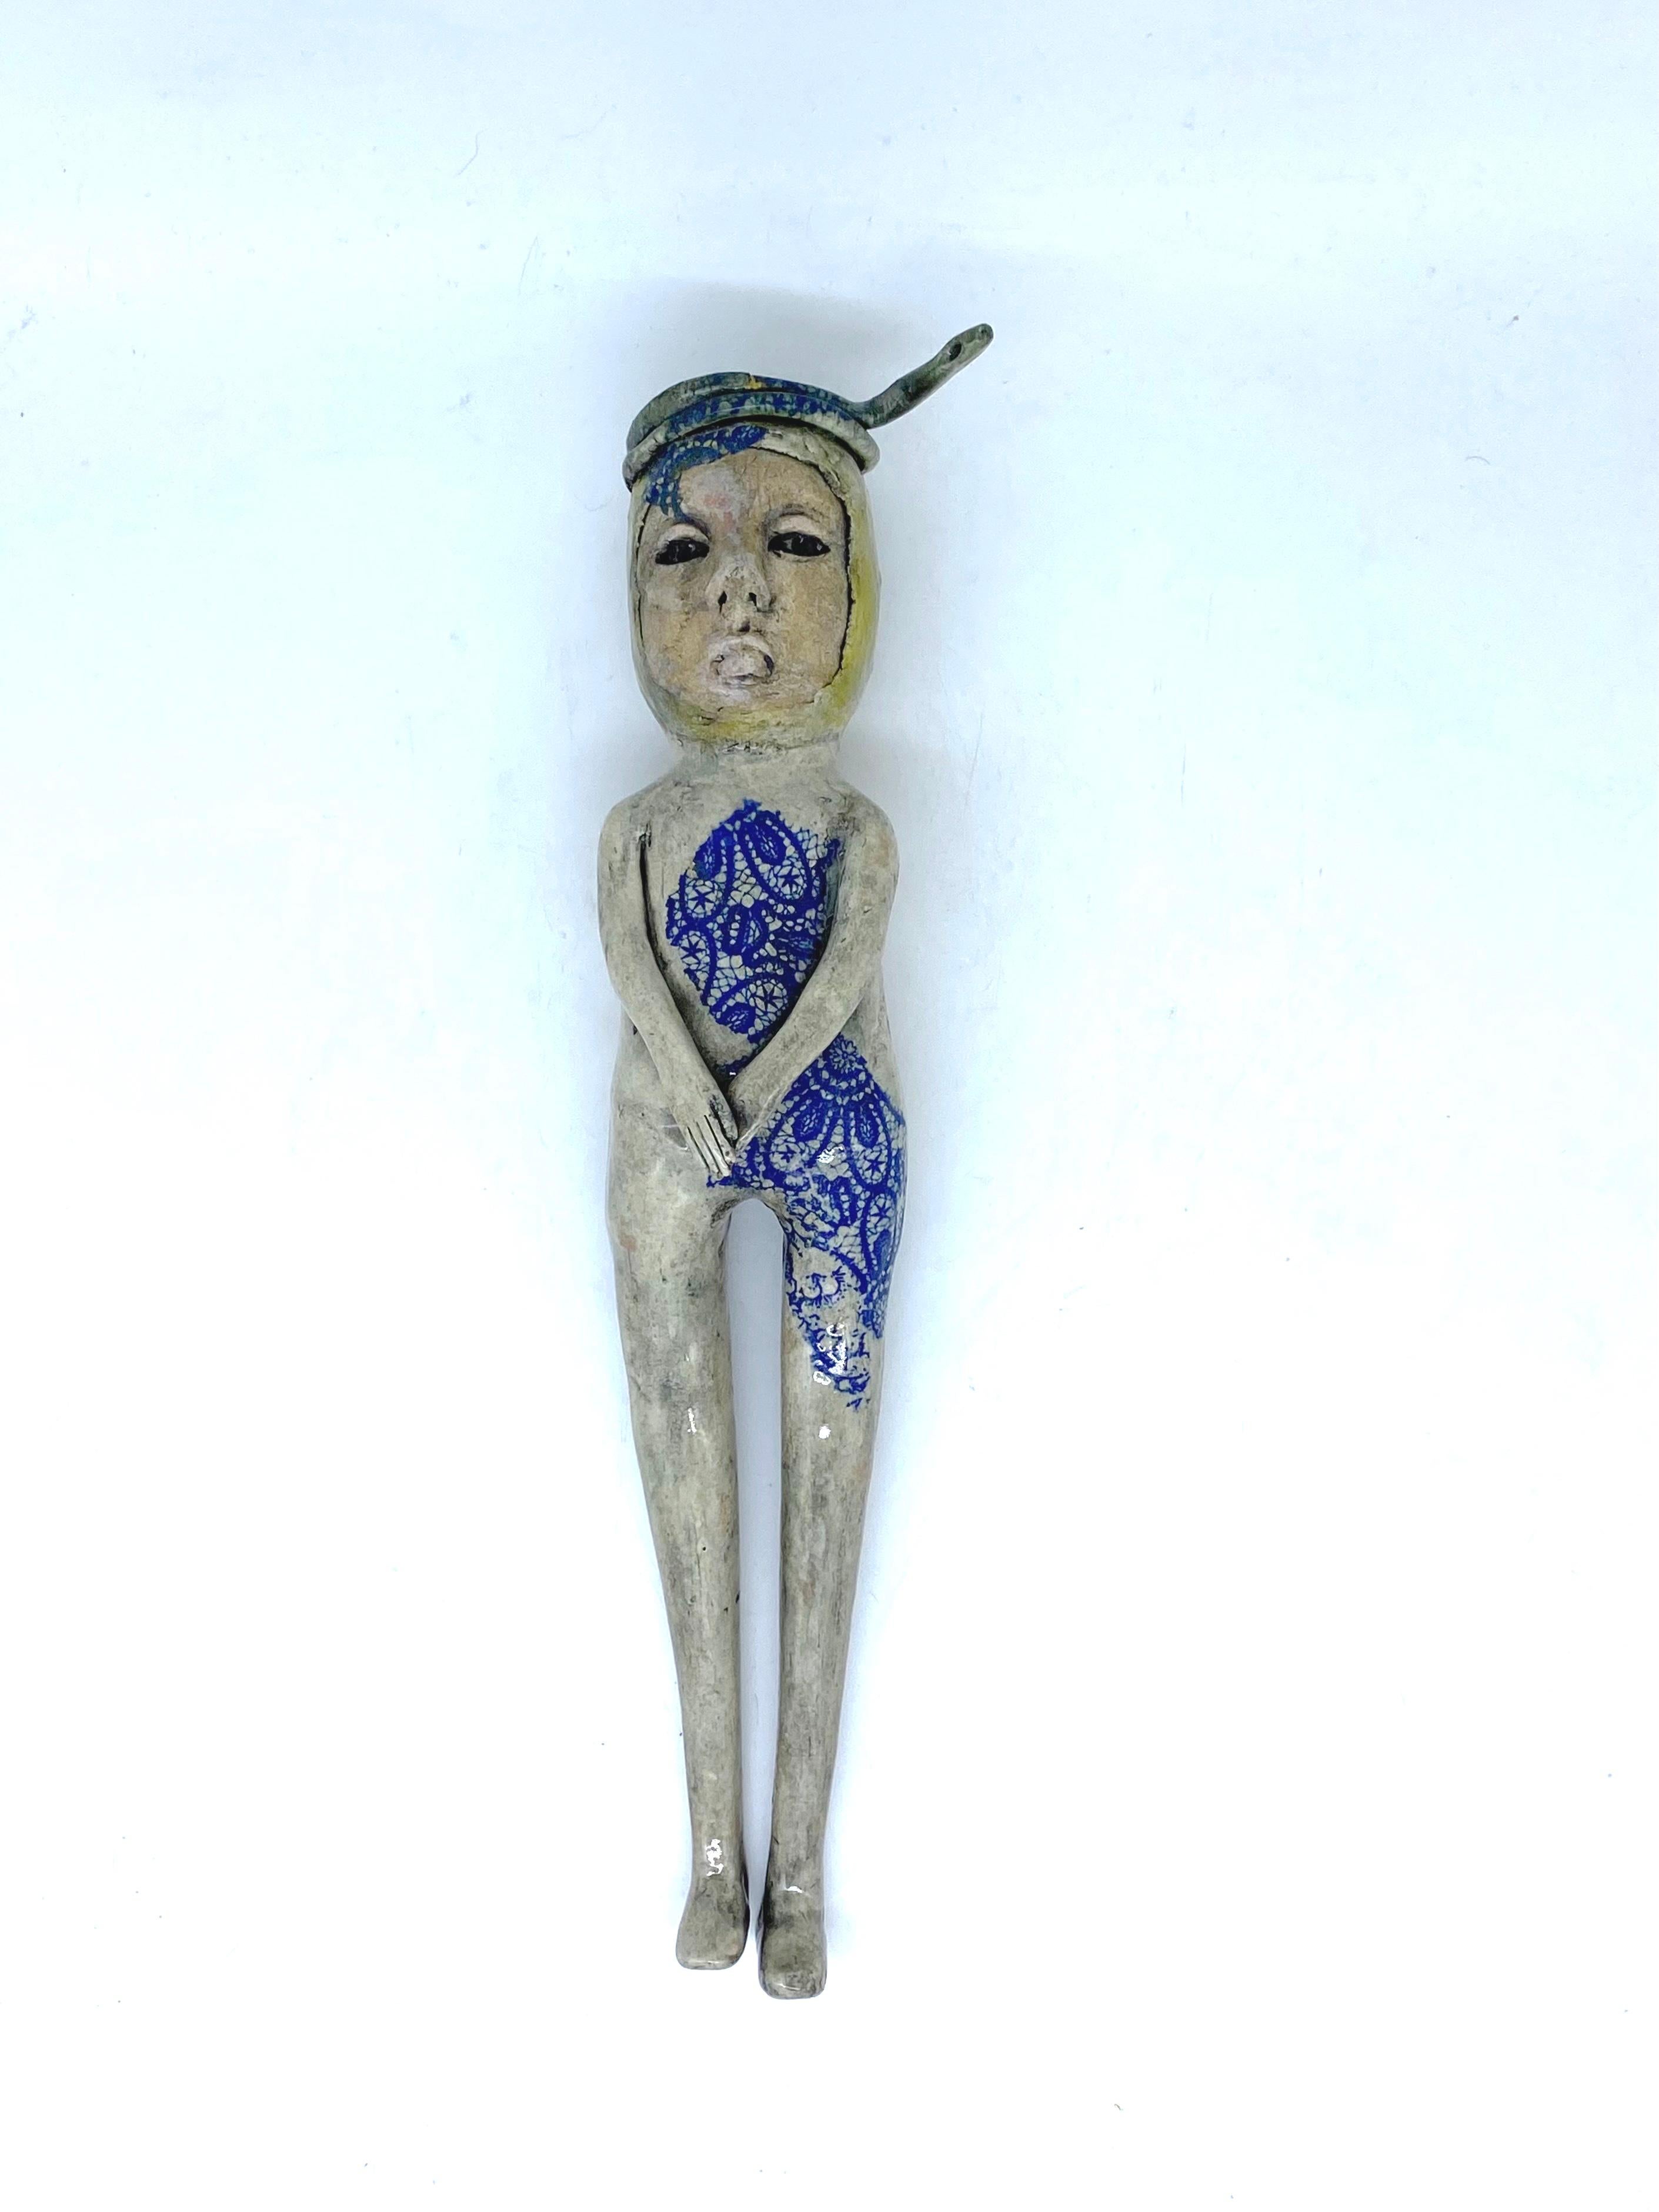 Ashley Benton Figurative Sculpture - Hanging ceramic sculpture: She got over her fear of snakes and found a good man